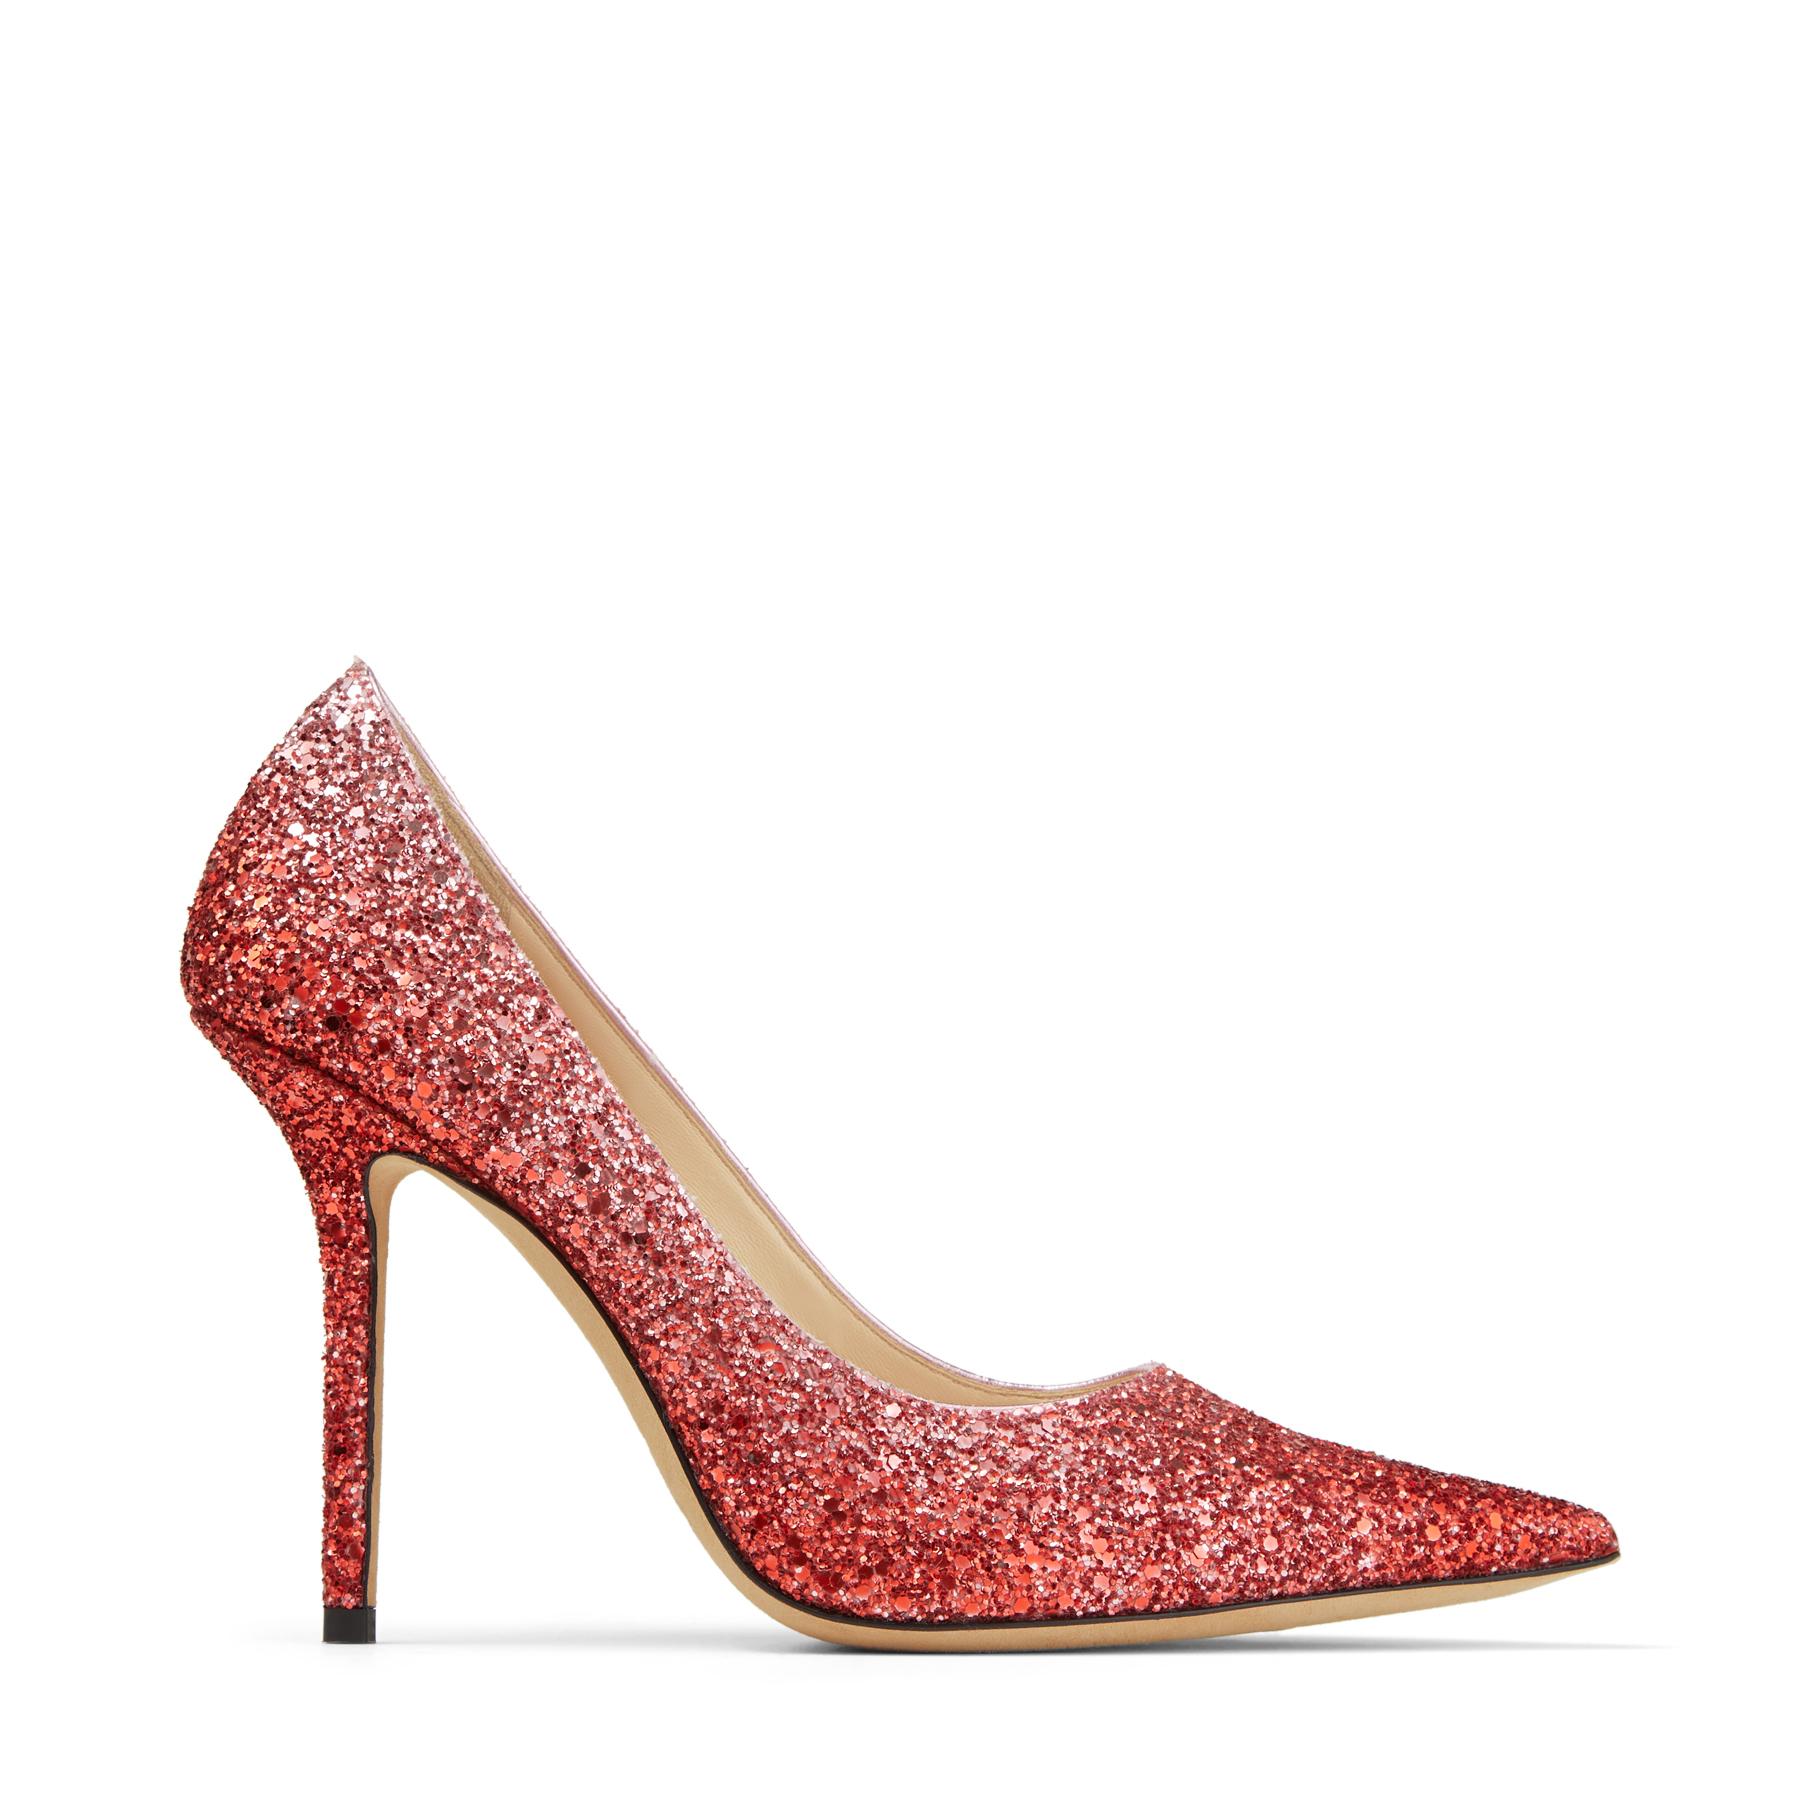 Buy > sparkly red high heels > in stock